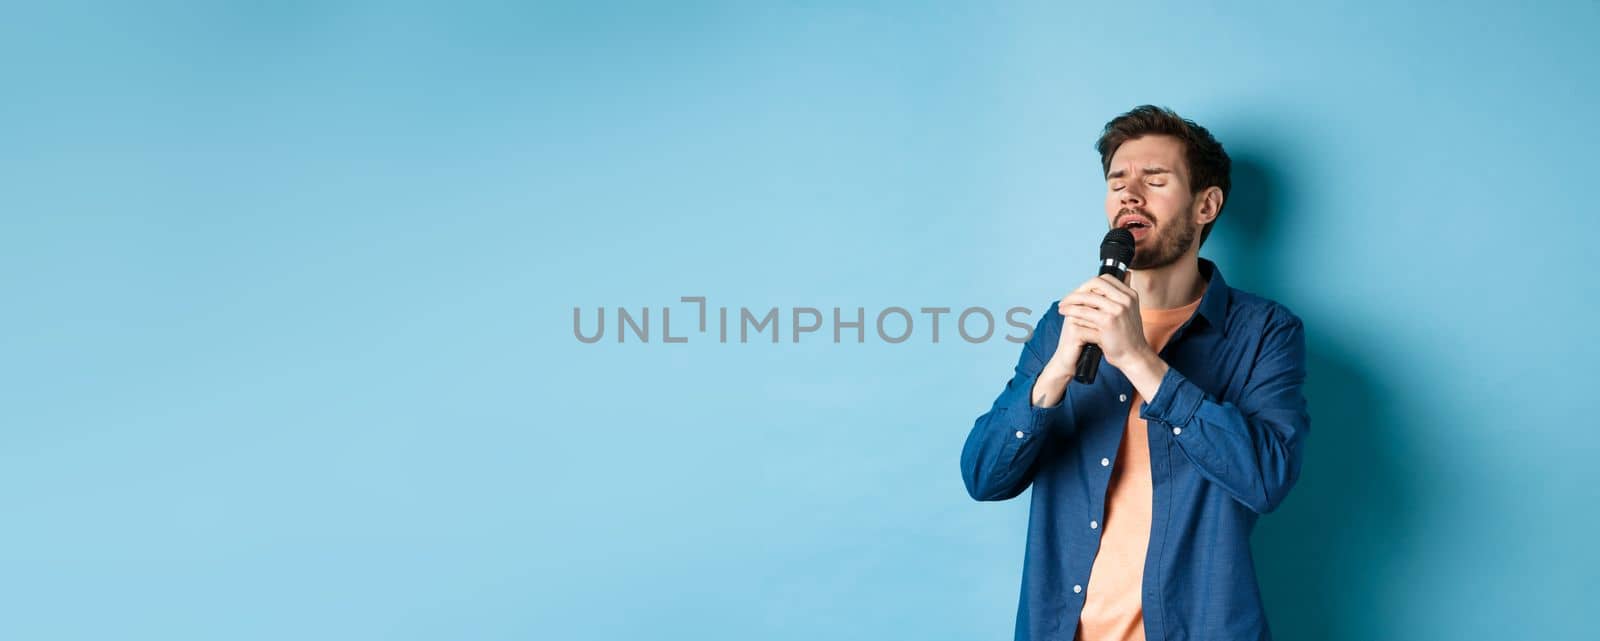 Romantic guy singing in microphone, performing on stage, standing on blue background.